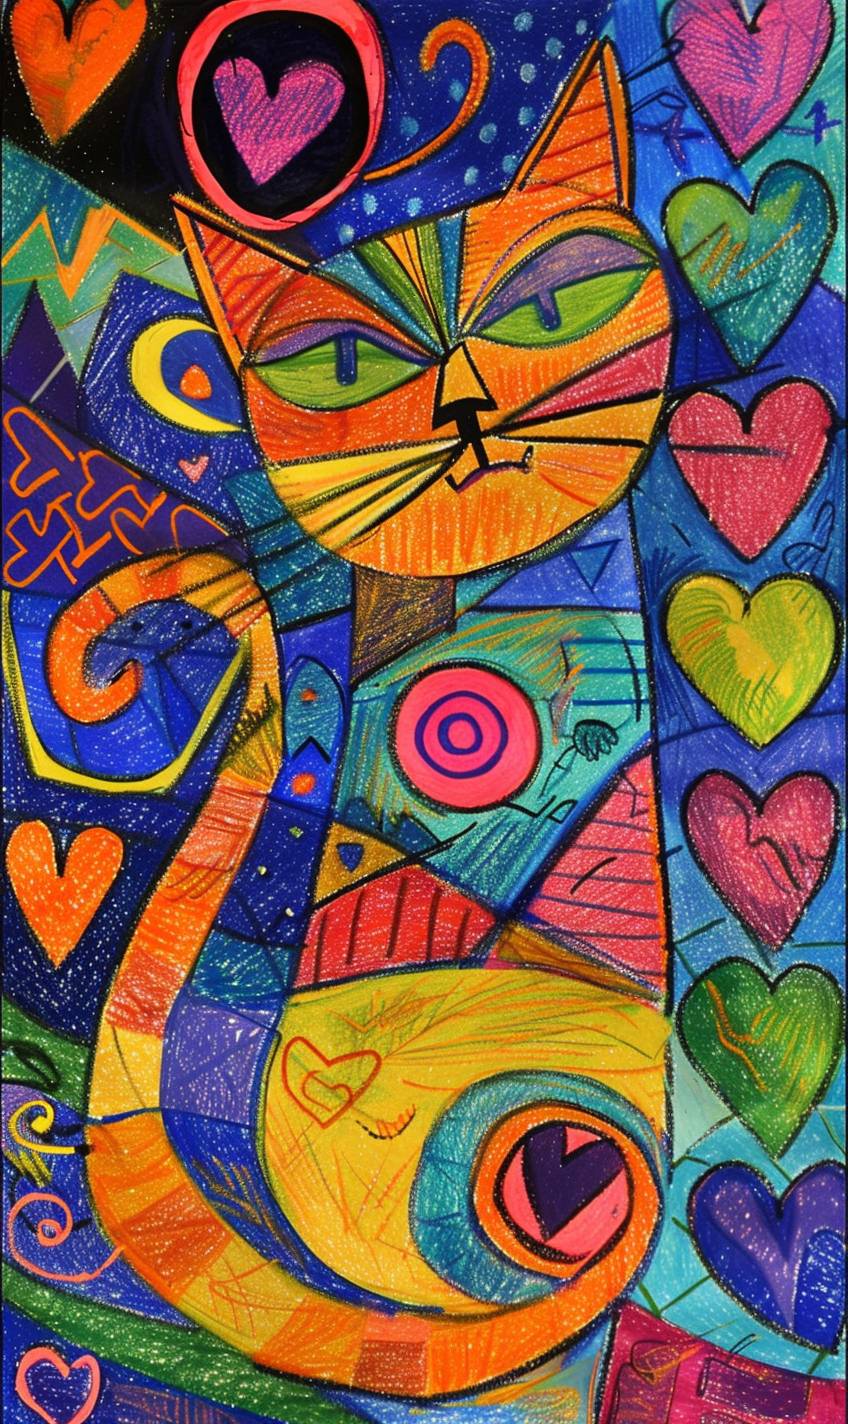 Risograph print of an oil pastel holographic scene with a cat, in the art style of Itzchak Tarkay. The artwork features a myriad of heart patterns, rich front and back views, and color blocks expressed in a simplistic manner. The style is reminiscent of surrealism, with predominantly bright and colorful hues, resembling oil paintings and sketchy fauvism in the style of Maira Kalman and Matisse.